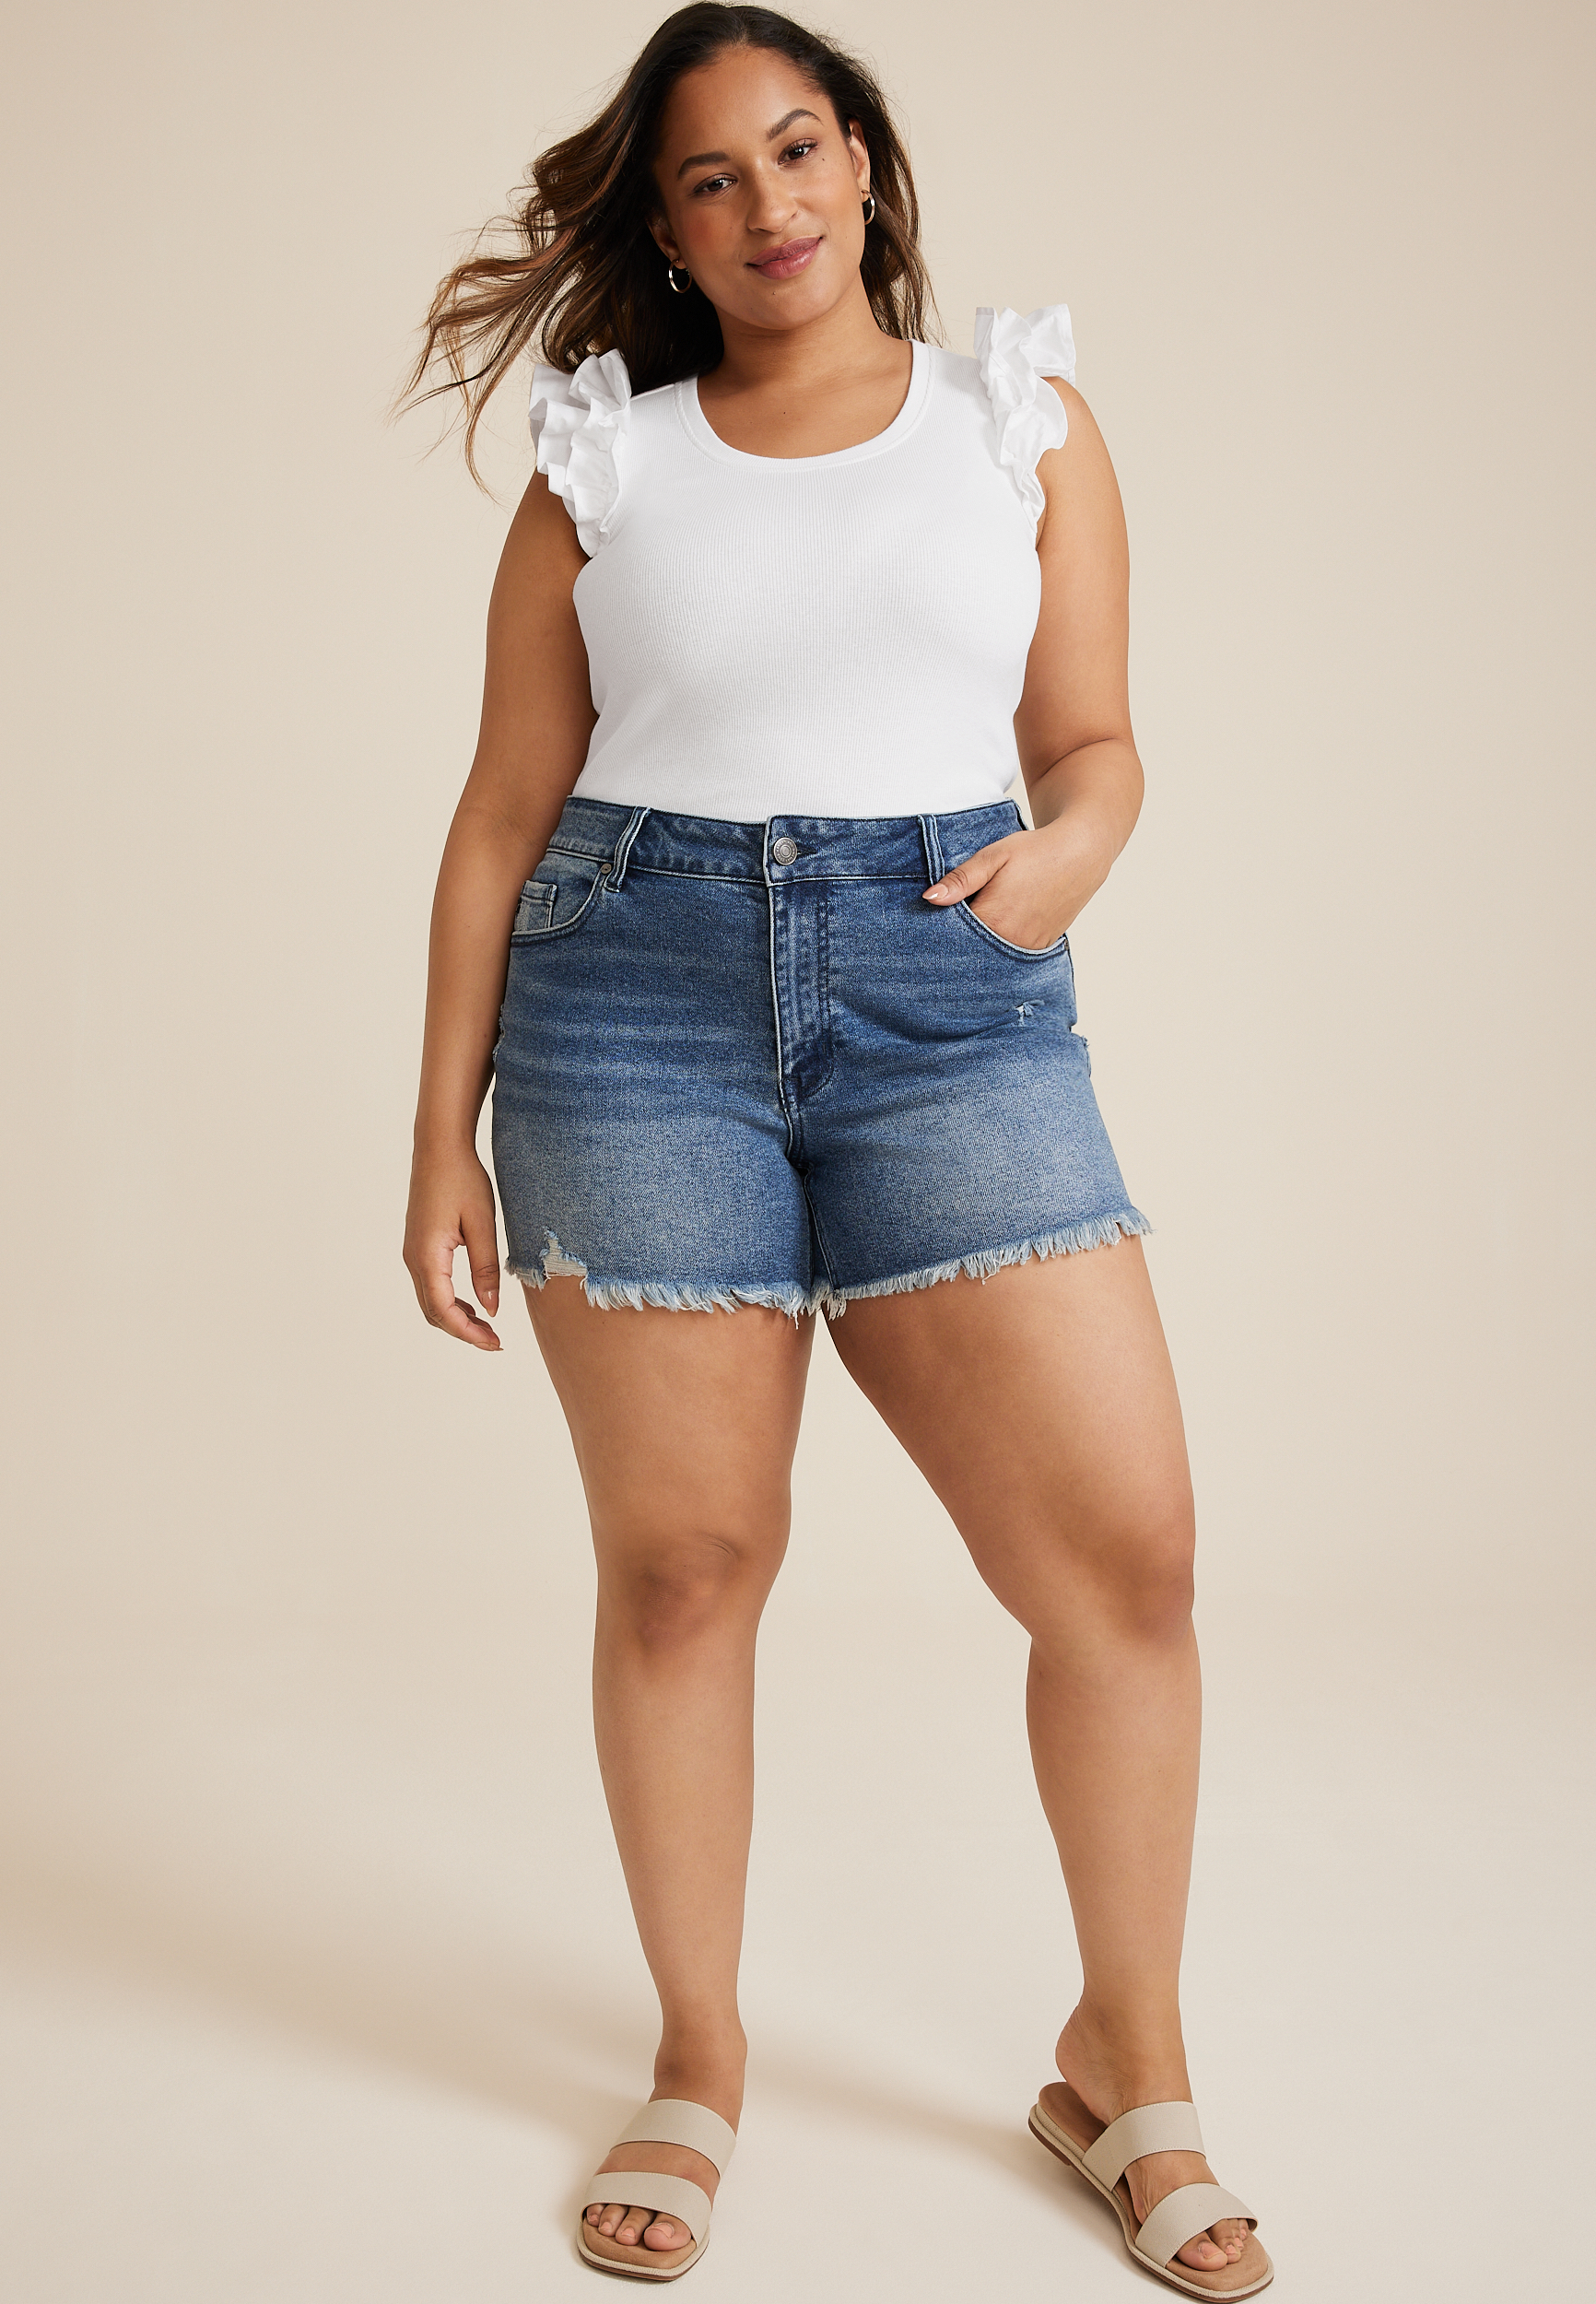 Plus Size Shorts for Different Occasions - Gorgeous & Beautiful